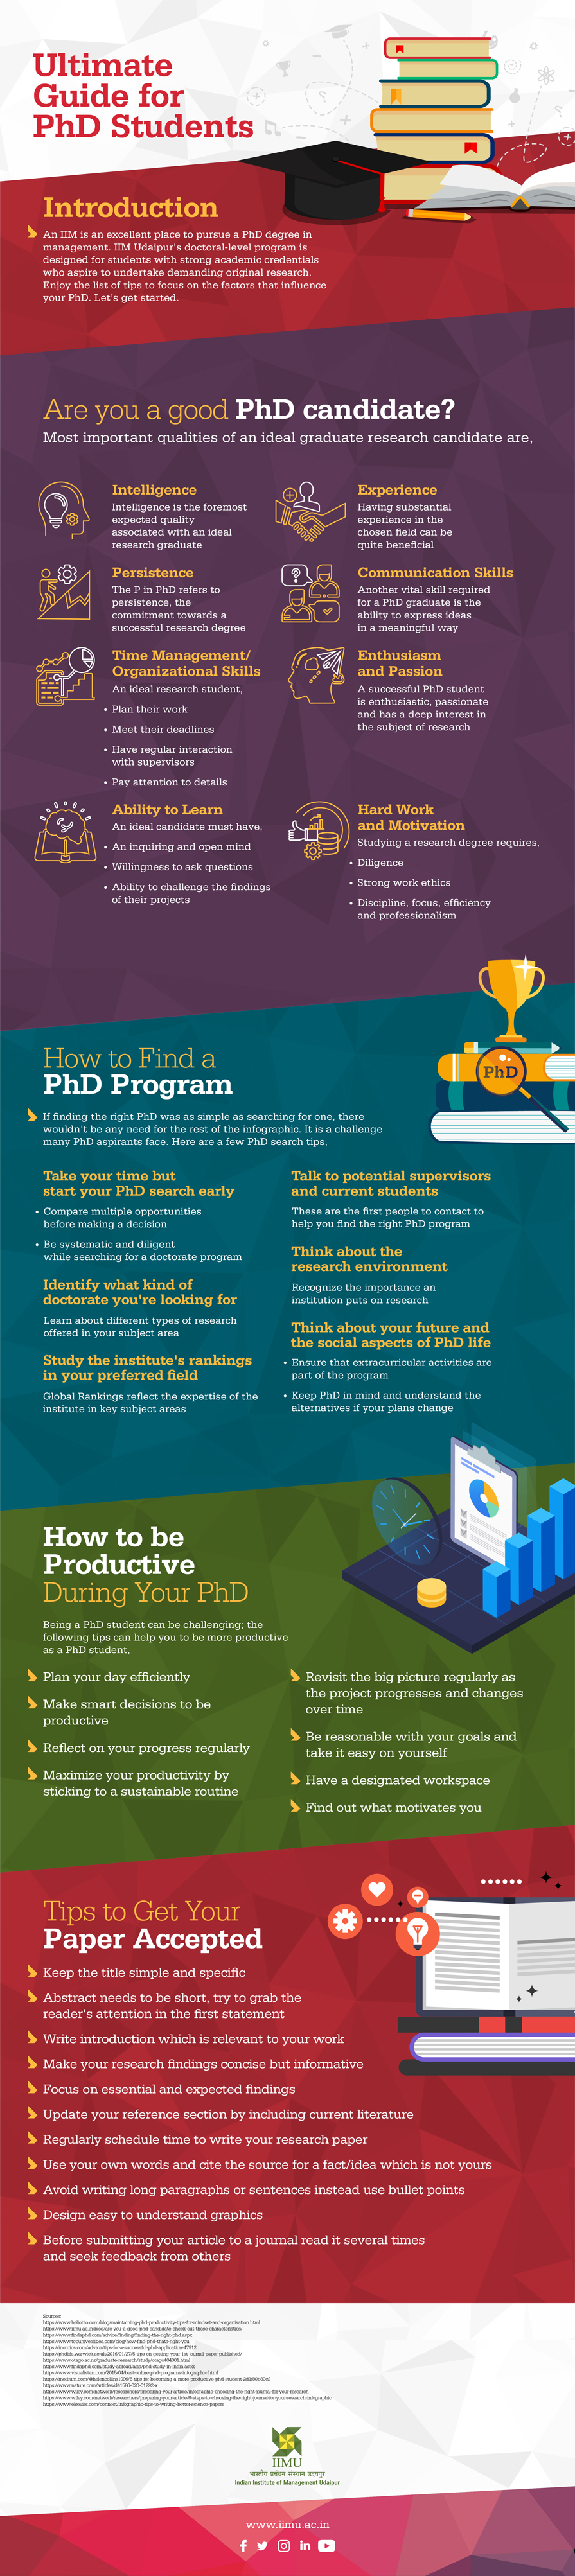 phd in education subjects